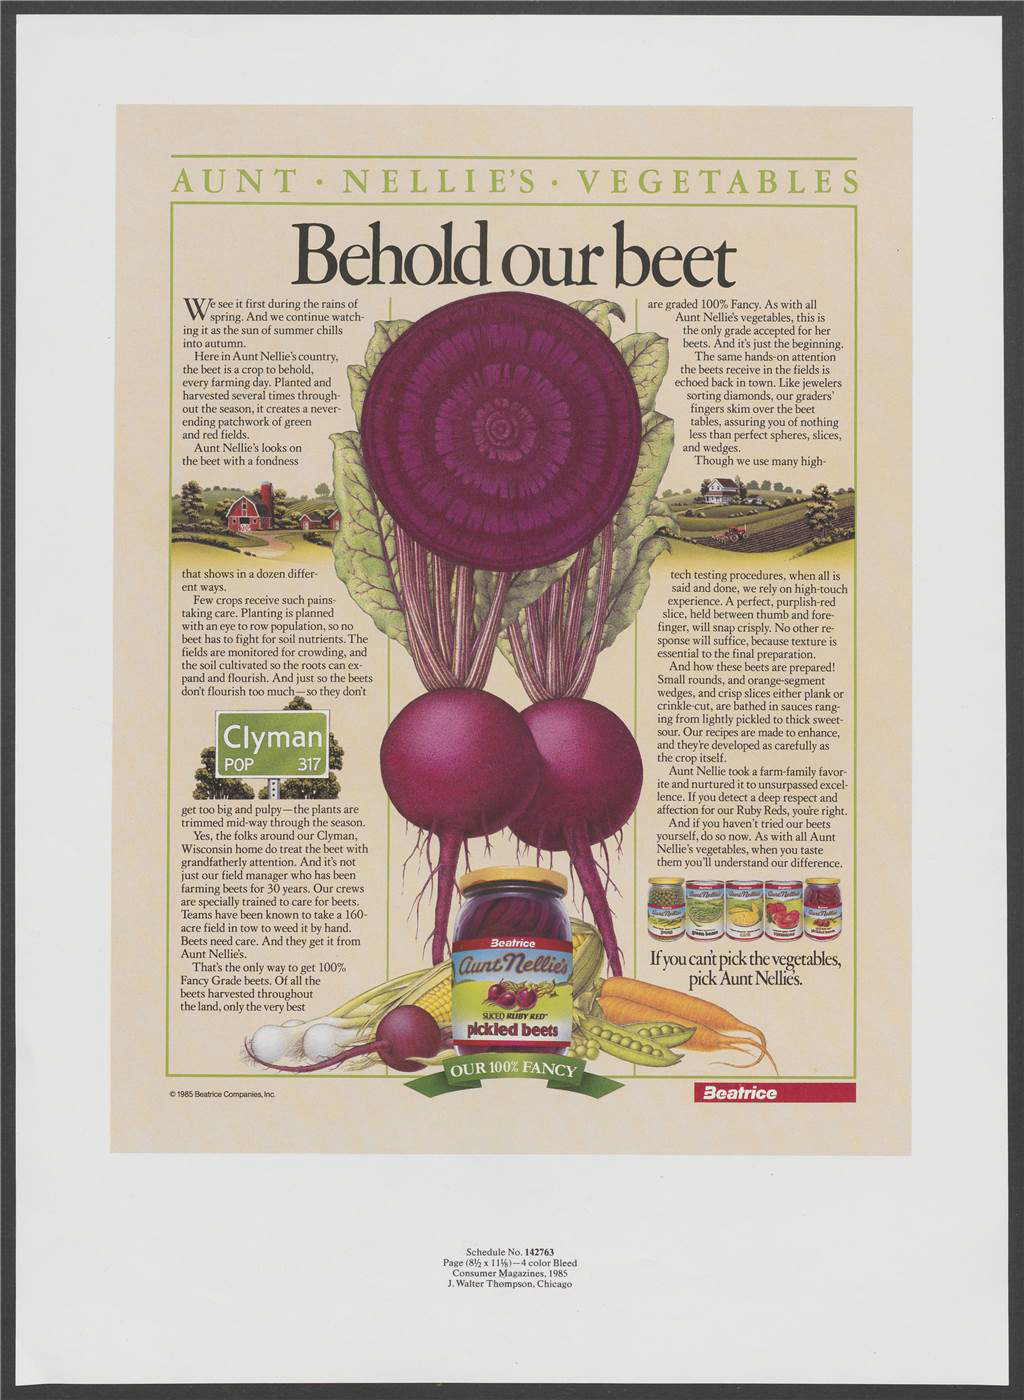 "Behold our beet". Artwork showing cross-section of a beetroot with smaller images of jars and cans of vegetables. Text mentions the process of growing, farming, harvesting and selecting the vegetables. Discussion of quality assurance and an assurance of difference in taste.